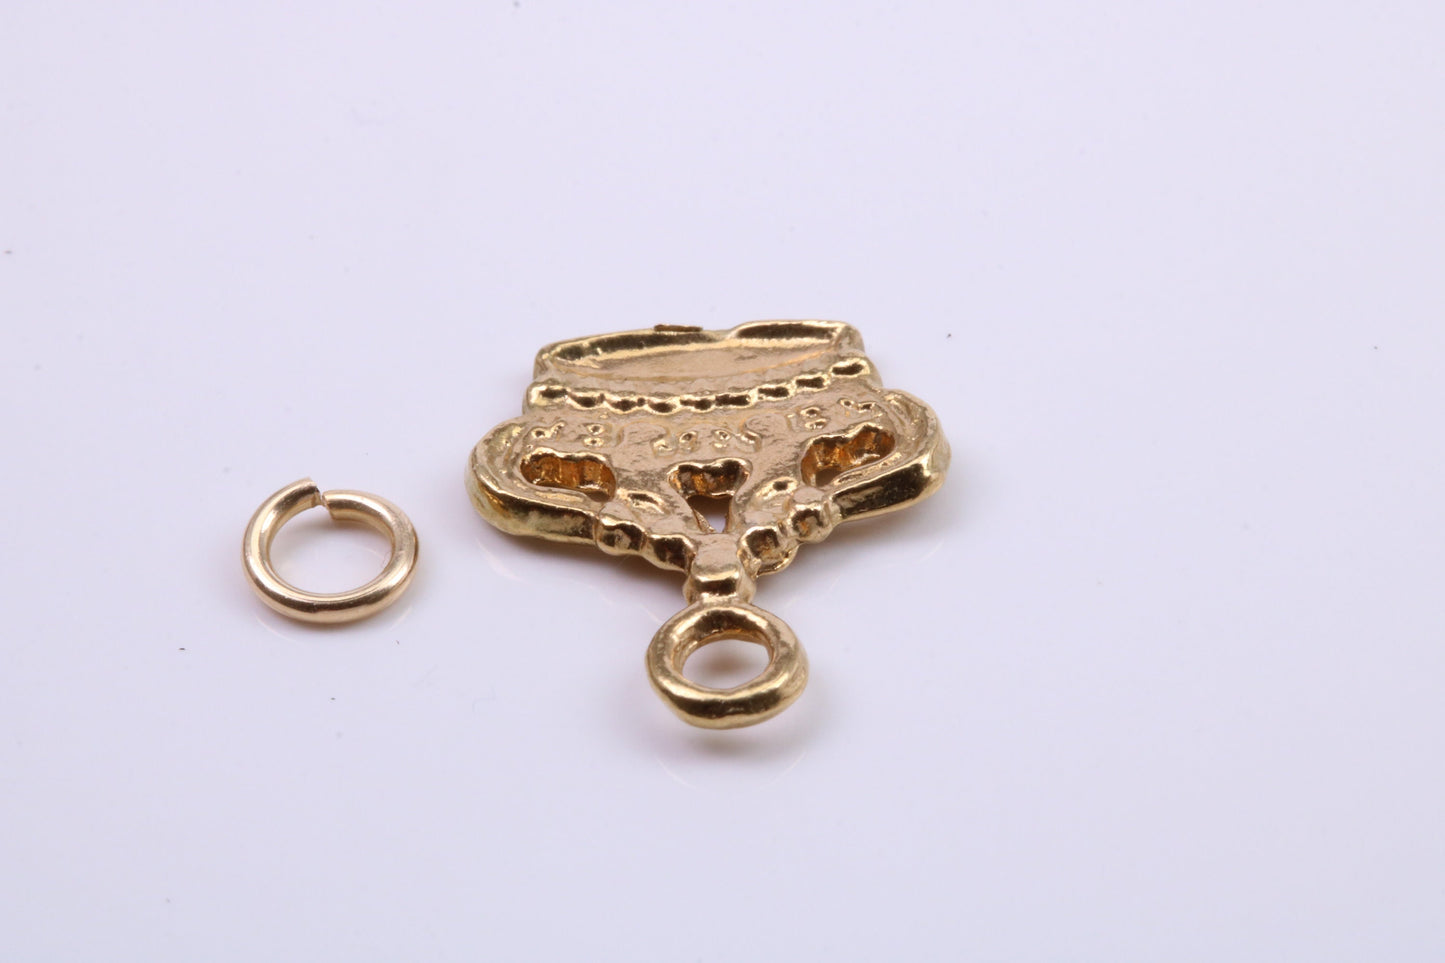 Royal Crown Charm, Traditional Charm, Made from Solid 9ct Yellow Gold, British Hallmarked, Complete with Attachment Link